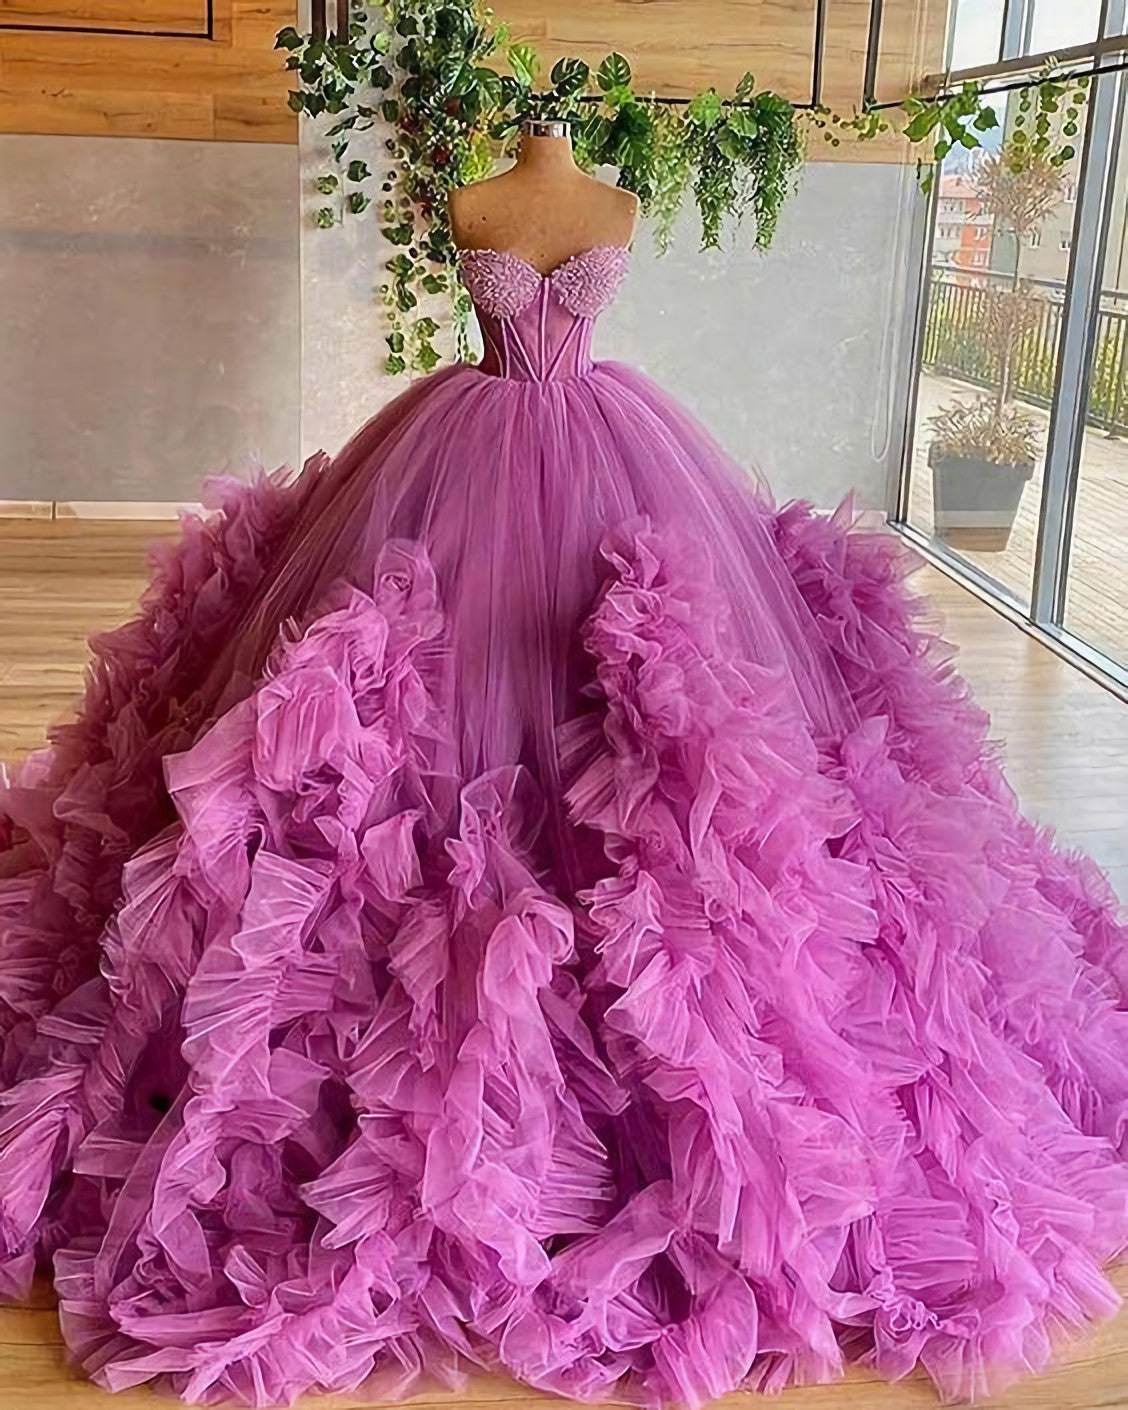 Prom Dresses Ballgown, Sweetheart Purple Beading Bodice Tulle Ruffle Pleated Ball Gown Evening Dress, Prom Gown